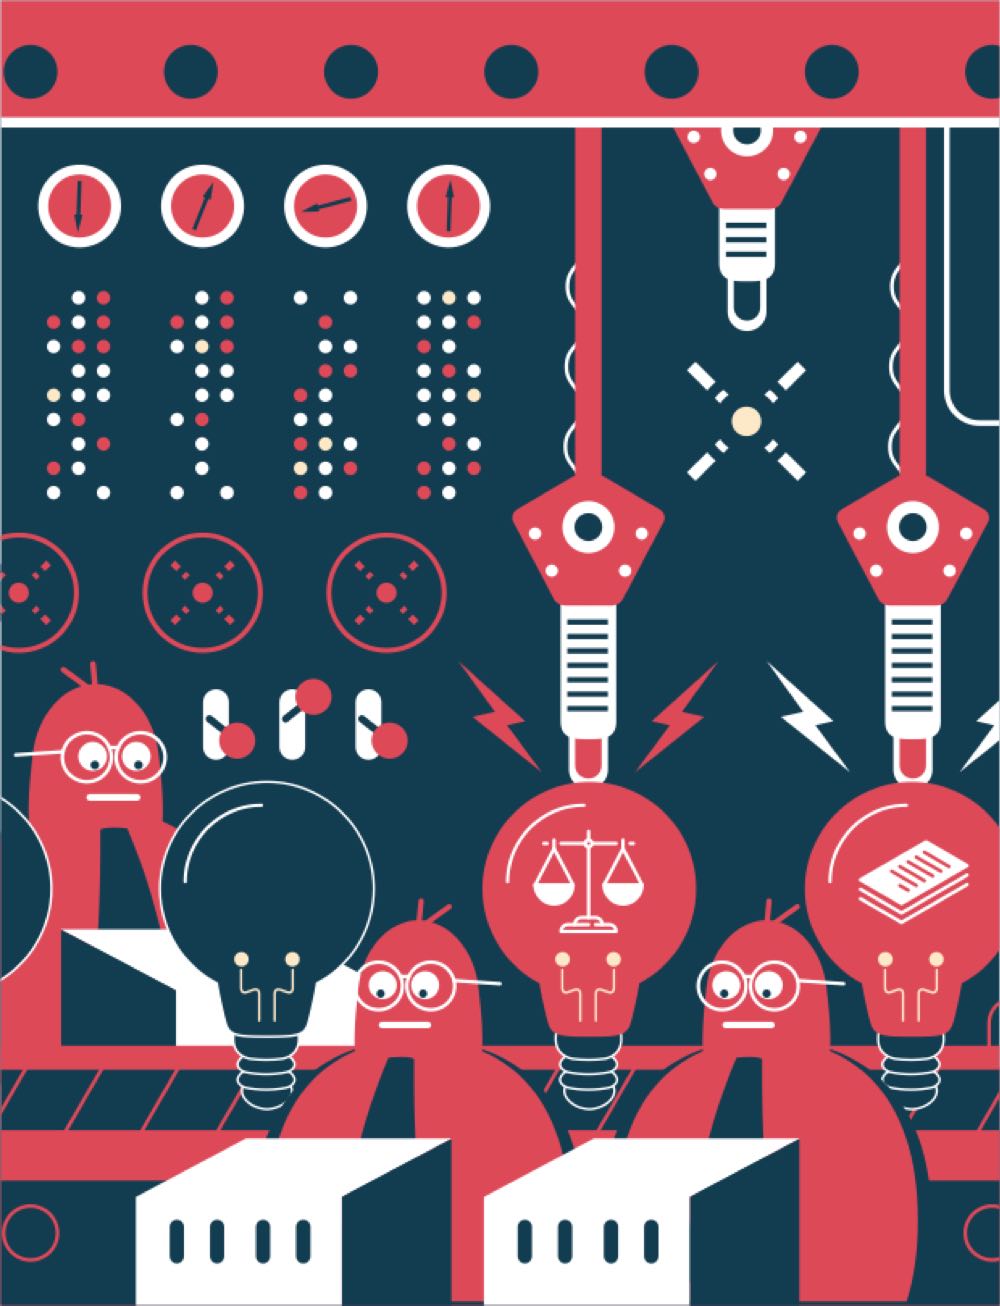 Abstract illustration of ligthbulbs on an assembly line